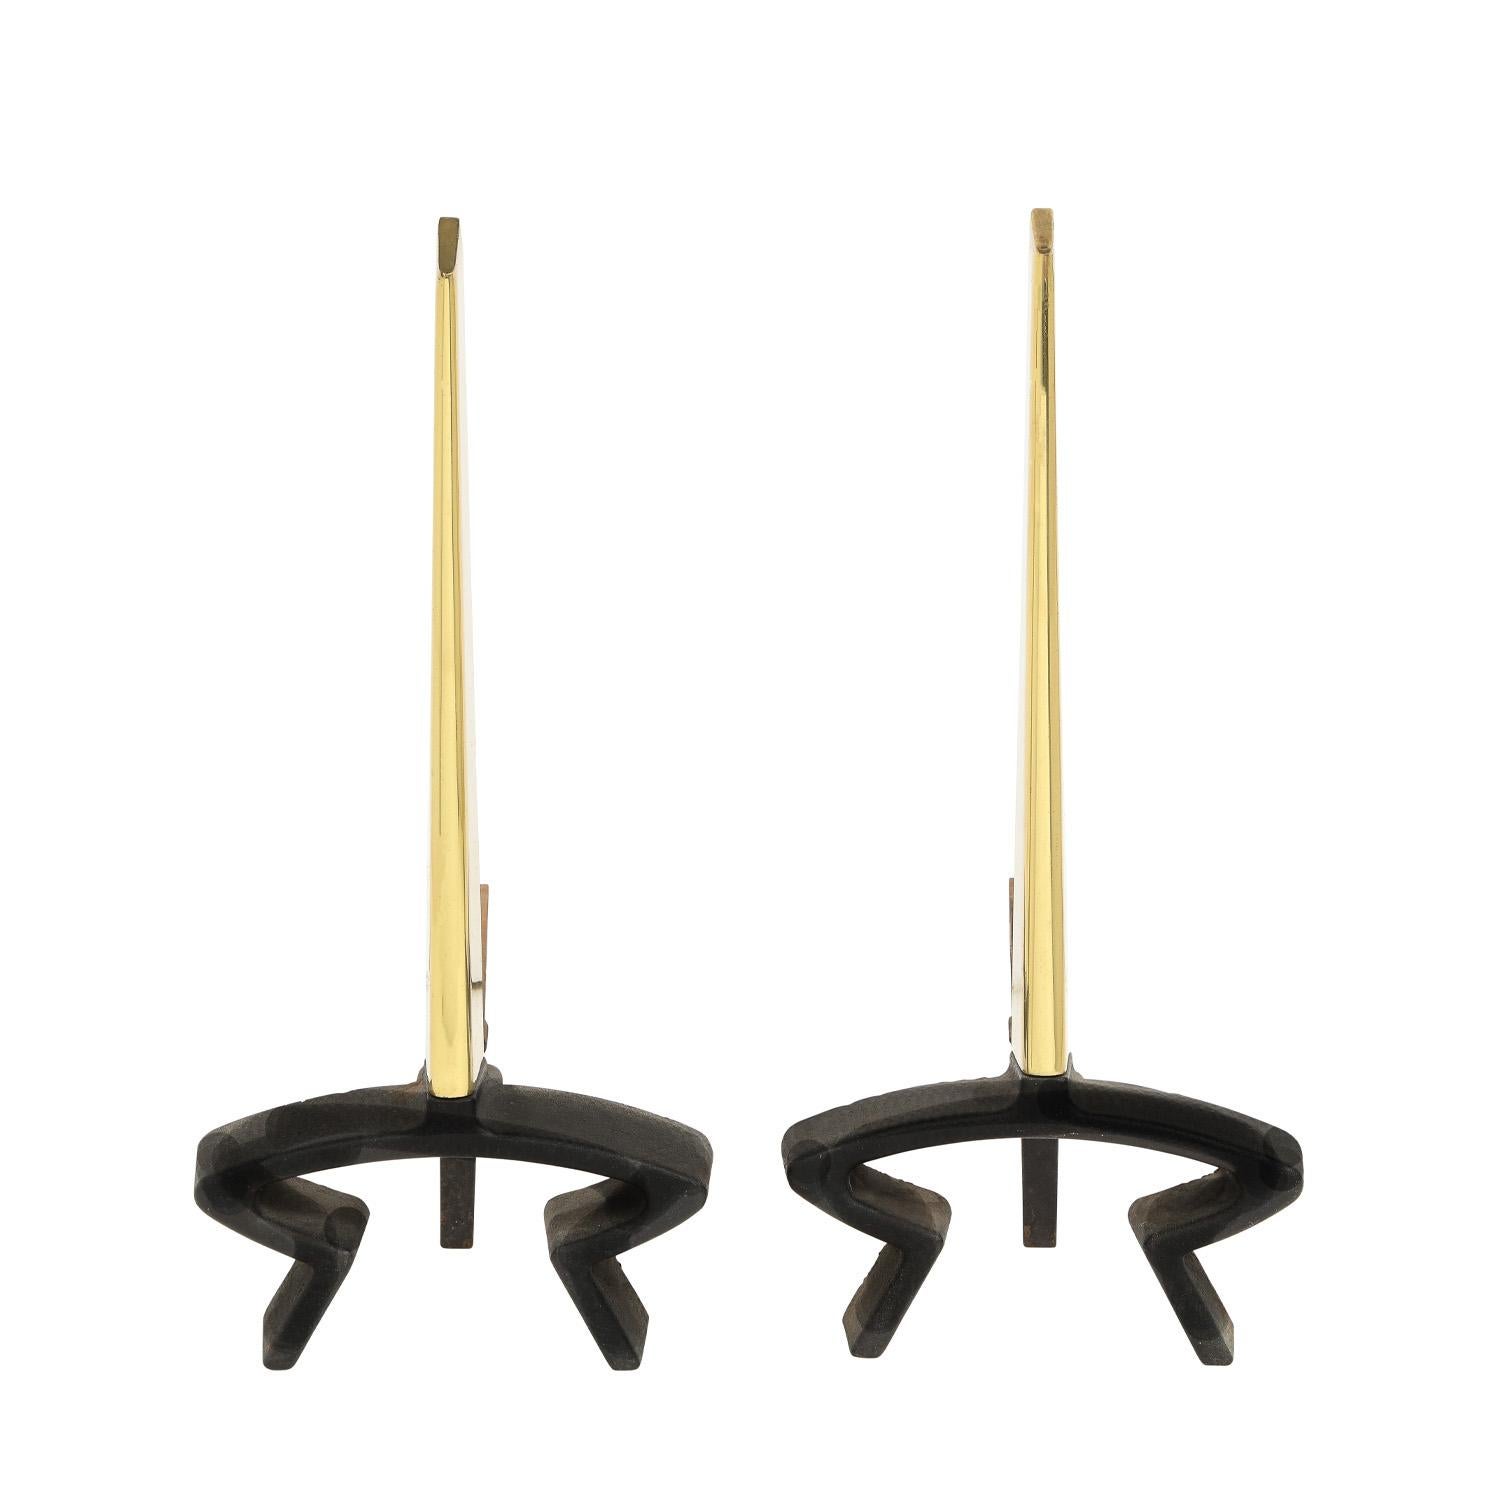 Mid-Century Modern Donald Deskey Pair of Andirons in Wrought Iron and Brass 1950s (Signed) For Sale